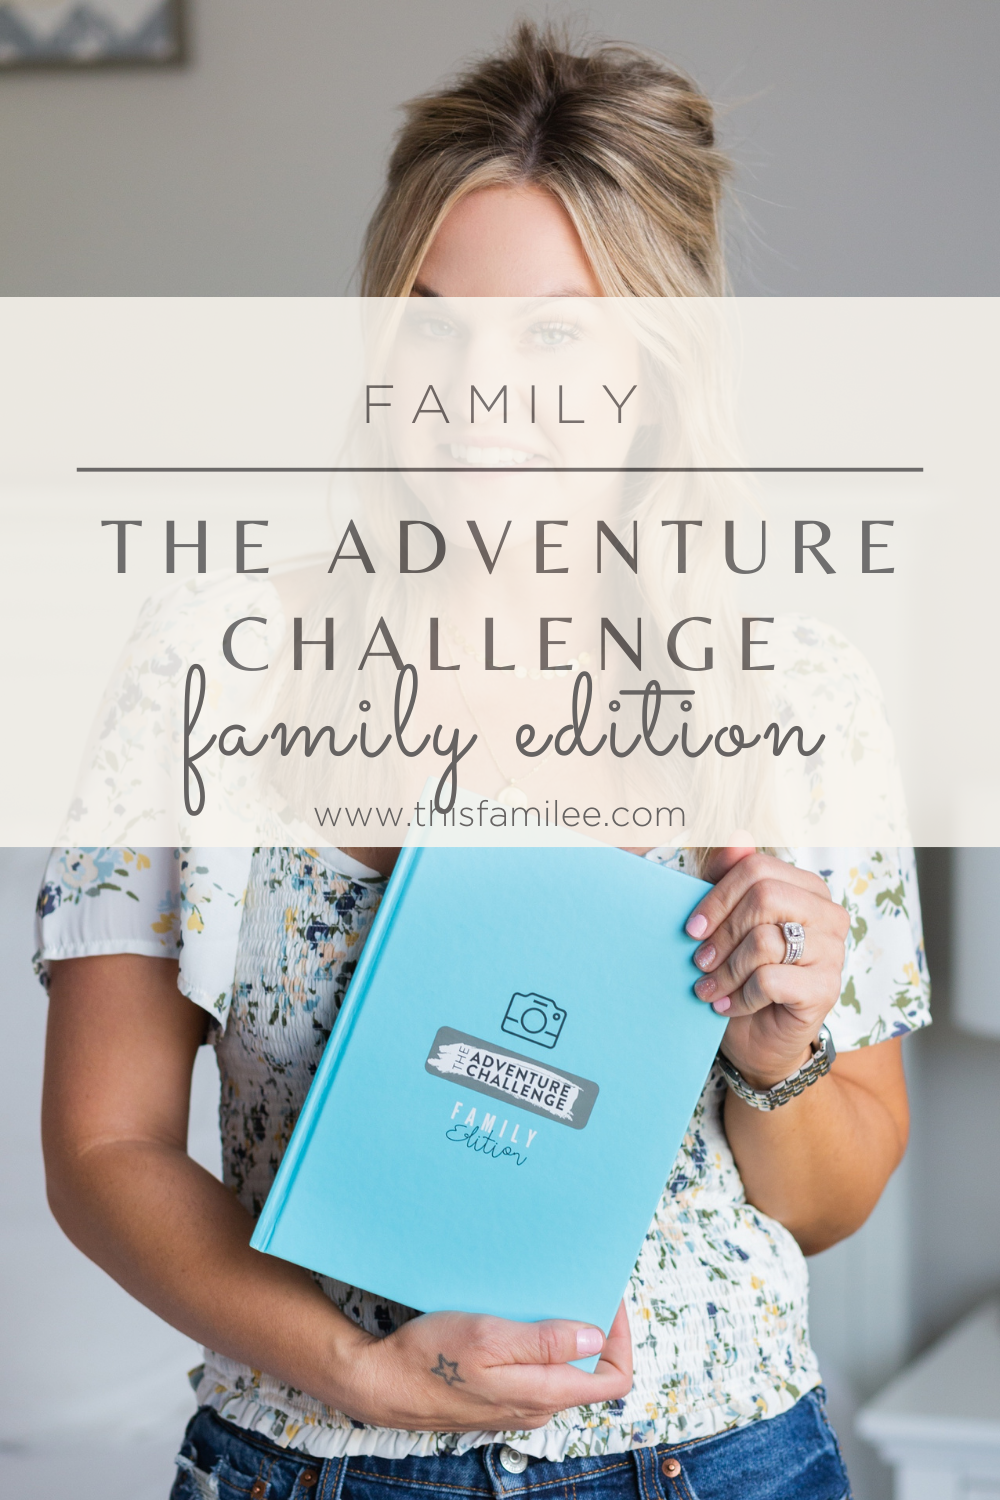 The Adventure Challenge Book. My family can't wait to get started